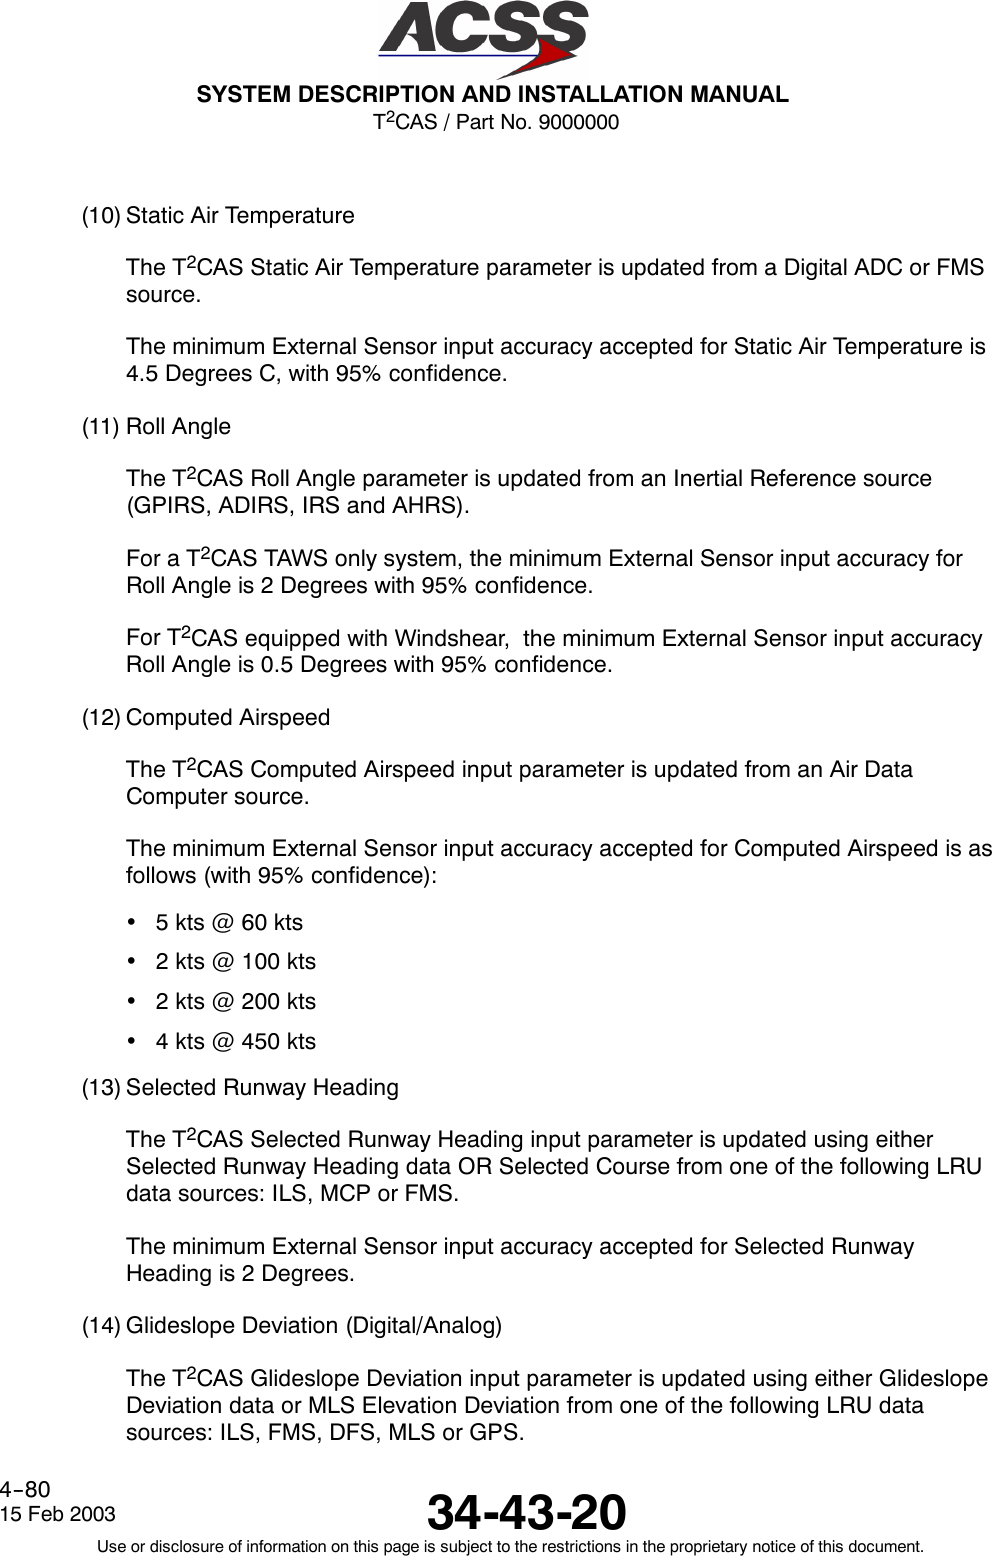 T2CAS / Part No. 9000000SYSTEM DESCRIPTION AND INSTALLATION MANUAL34-43-2015 Feb 2003Use or disclosure of information on this page is subject to the restrictions in the proprietary notice of this document.4--80(10) Static Air TemperatureThe T2CAS Static Air Temperature parameter is updated from a Digital ADC or FMSsource.The minimum External Sensor input accuracy accepted for Static Air Temperature is4.5 Degrees C, with 95% confidence.(11) Roll AngleThe T2CAS Roll Angle parameter is updated from an Inertial Reference source(GPIRS, ADIRS, IRS and AHRS).For a T2CAS TAWS only system, the minimum External Sensor input accuracy forRoll Angle is 2 Degrees with 95% confidence.For T2CAS equipped with Windshear, the minimum External Sensor input accuracyRoll Angle is 0.5 Degrees with 95% confidence.(12) Computed AirspeedThe T2CAS Computed Airspeed input parameter is updated from an Air DataComputer source.The minimum External Sensor input accuracy accepted for Computed Airspeed is asfollows (with 95% confidence):•5kts@60kts•2 kts @ 100 kts•2 kts @ 200 kts•4 kts @ 450 kts(13) Selected Runway HeadingThe T2CAS Selected Runway Heading input parameter is updated using eitherSelected Runway Heading data OR Selected Course from one of the following LRUdata sources: ILS, MCP or FMS.The minimum External Sensor input accuracy accepted for Selected RunwayHeading is 2 Degrees.(14) Glideslope Deviation (Digital/Analog)The T2CAS Glideslope Deviation input parameter is updated using either GlideslopeDeviation data or MLS Elevation Deviation from one of the following LRU datasources: ILS, FMS, DFS, MLS or GPS.